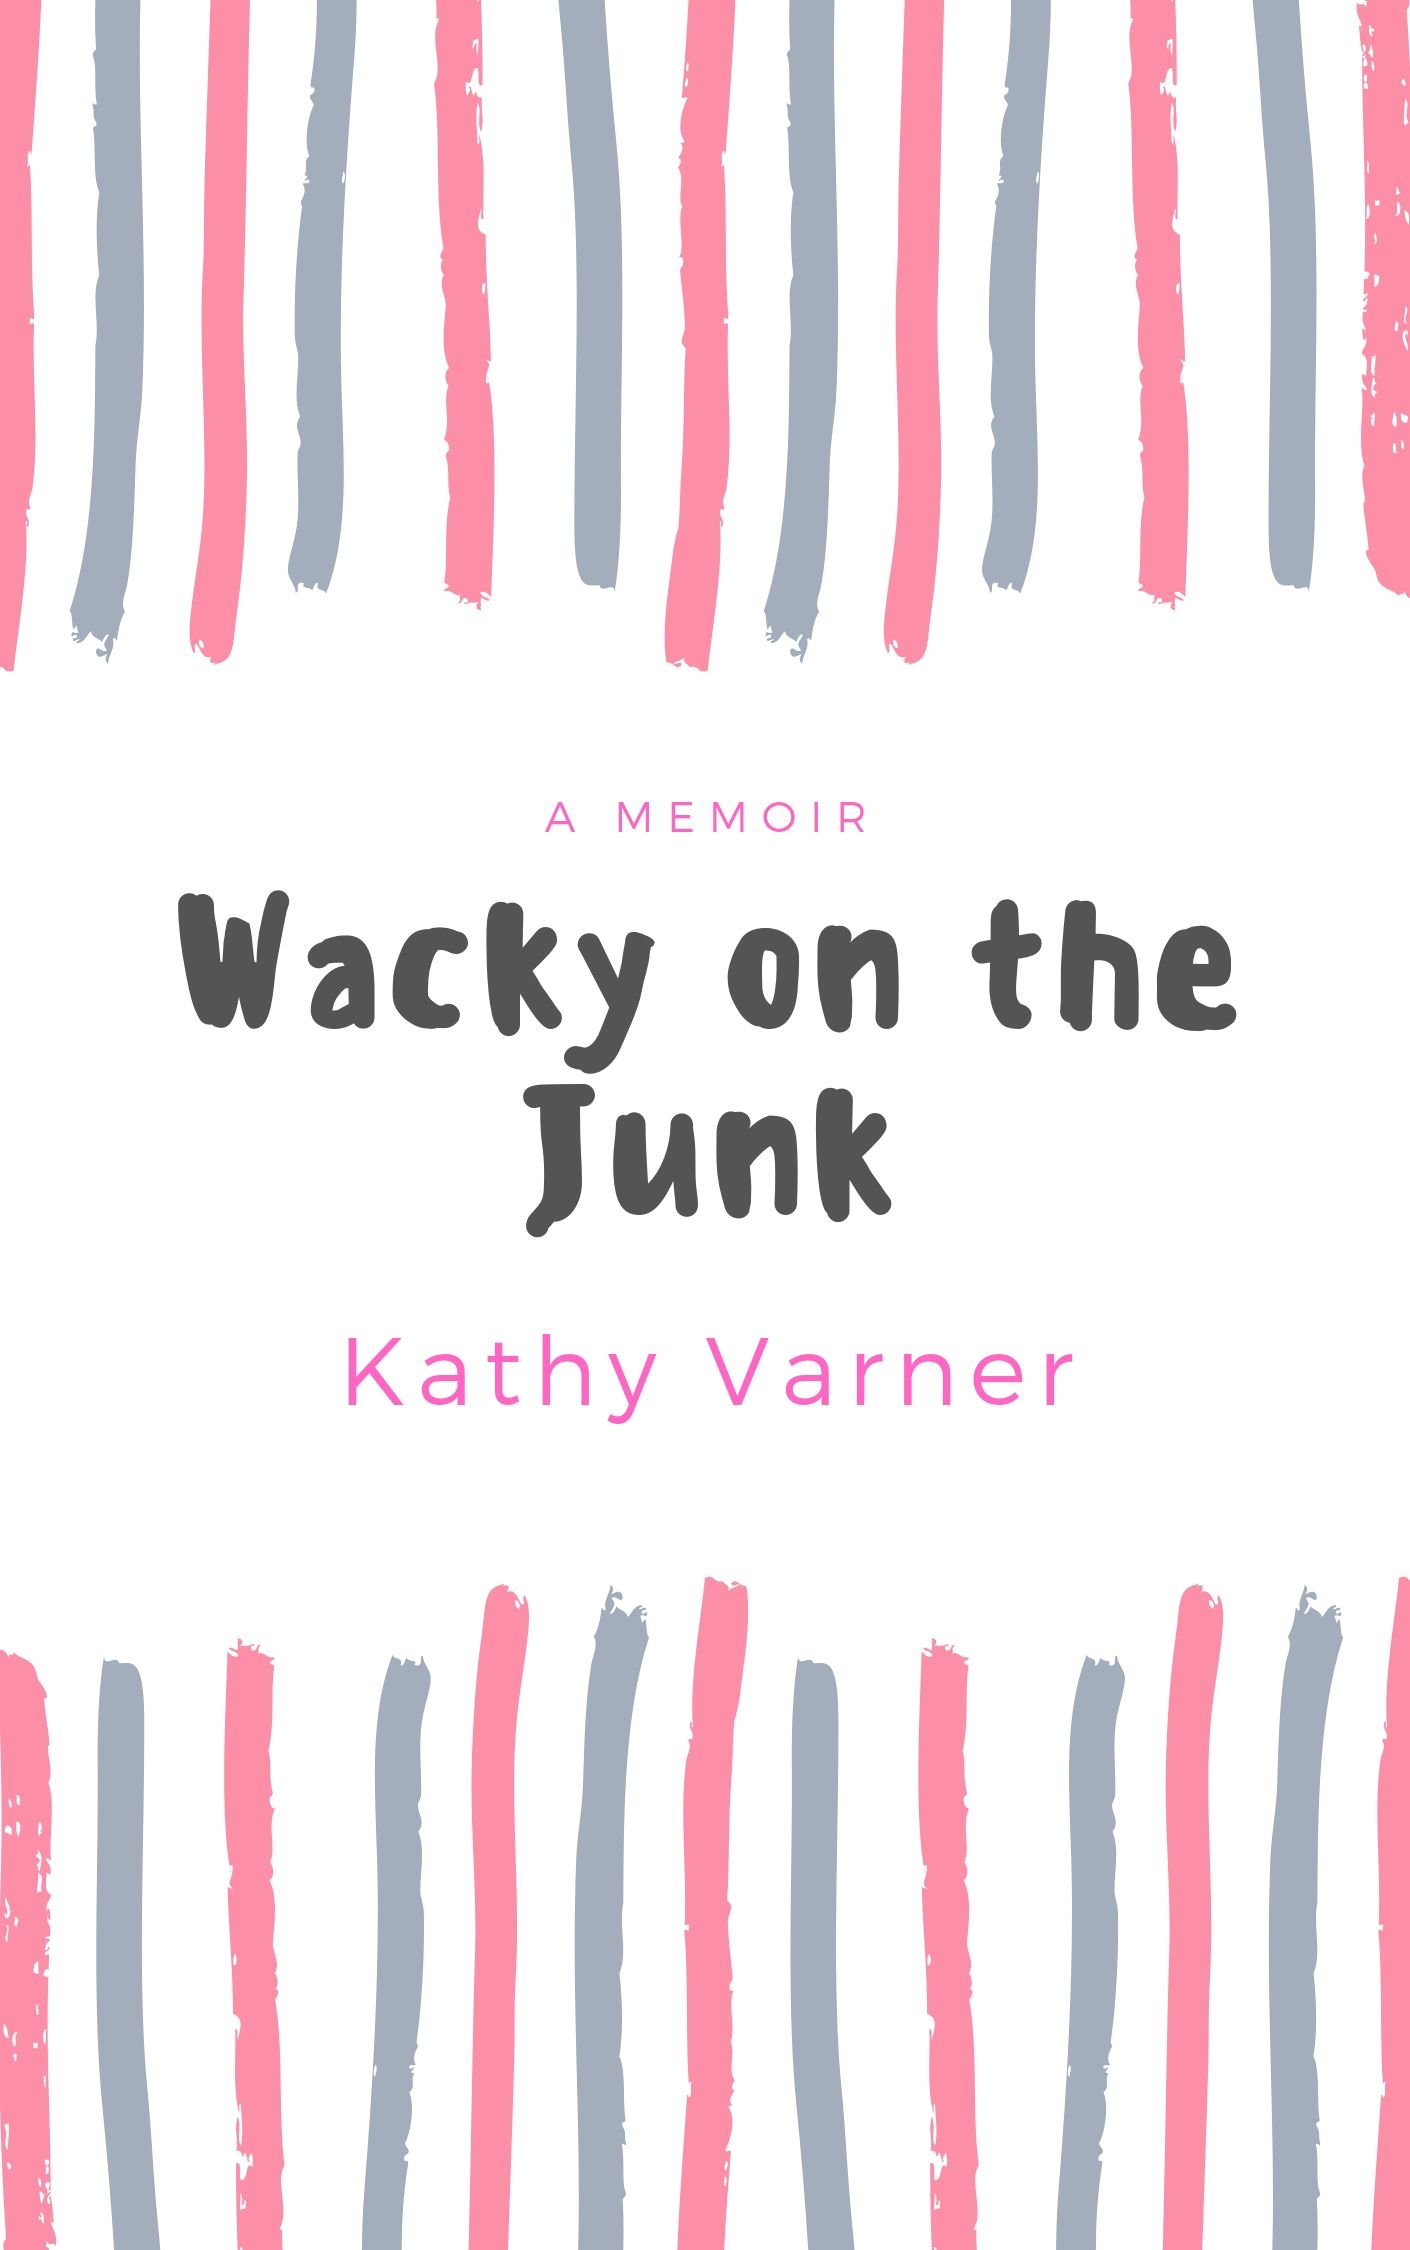 Wacky on the Junk by Kathy Varner